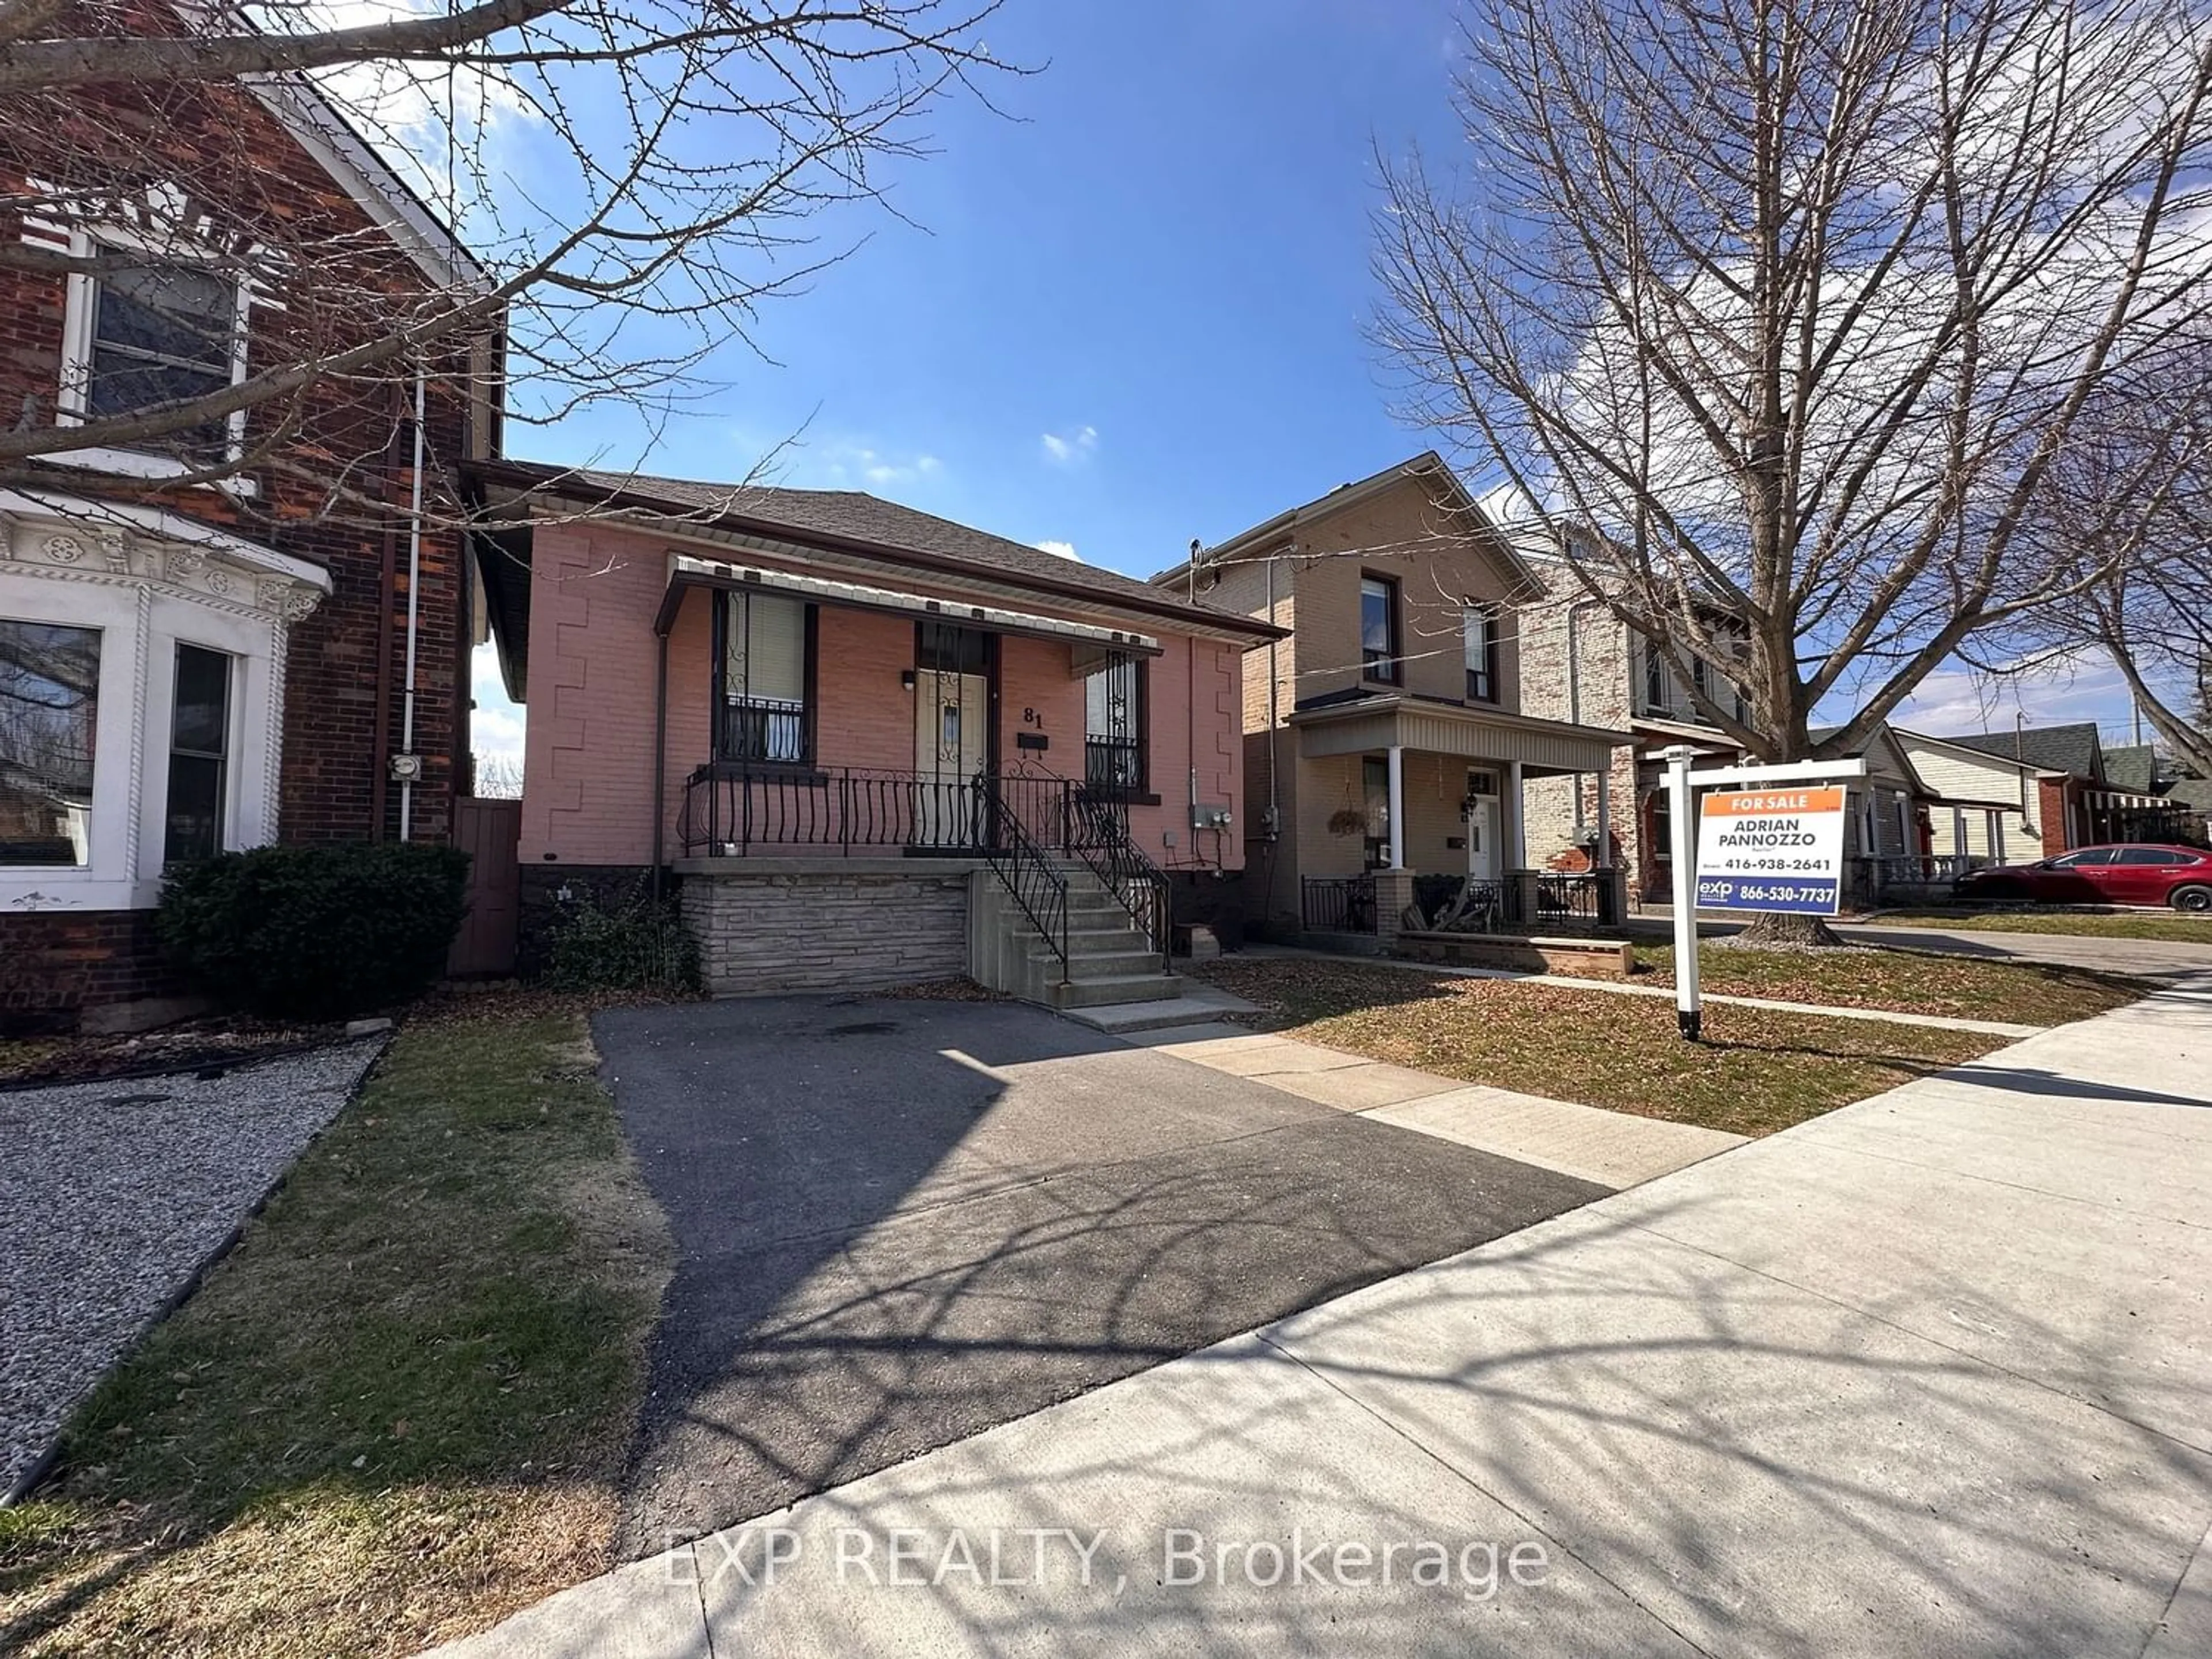 Frontside or backside of a home for 81 Colbourne St, Hamilton Ontario L8R 2G6